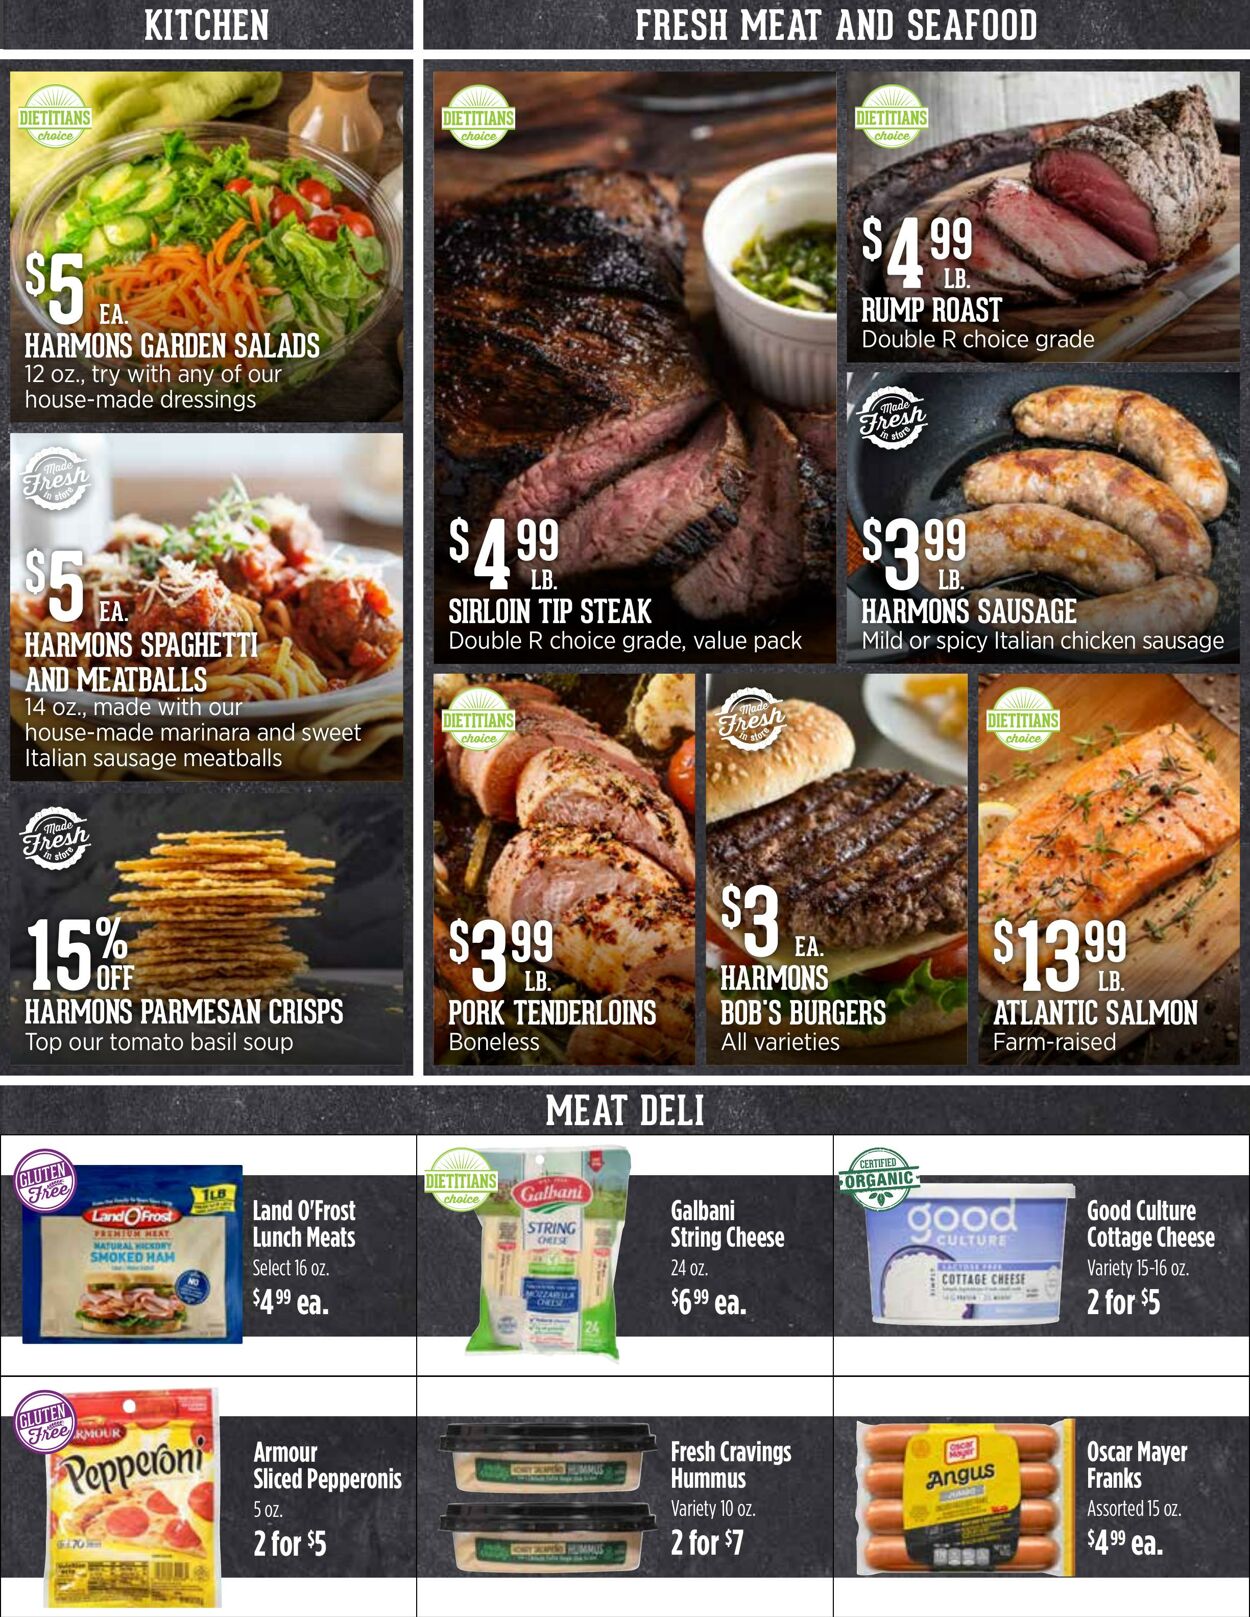 Weekly ad Harmons Grocery 02/21/2023 - 02/27/2023